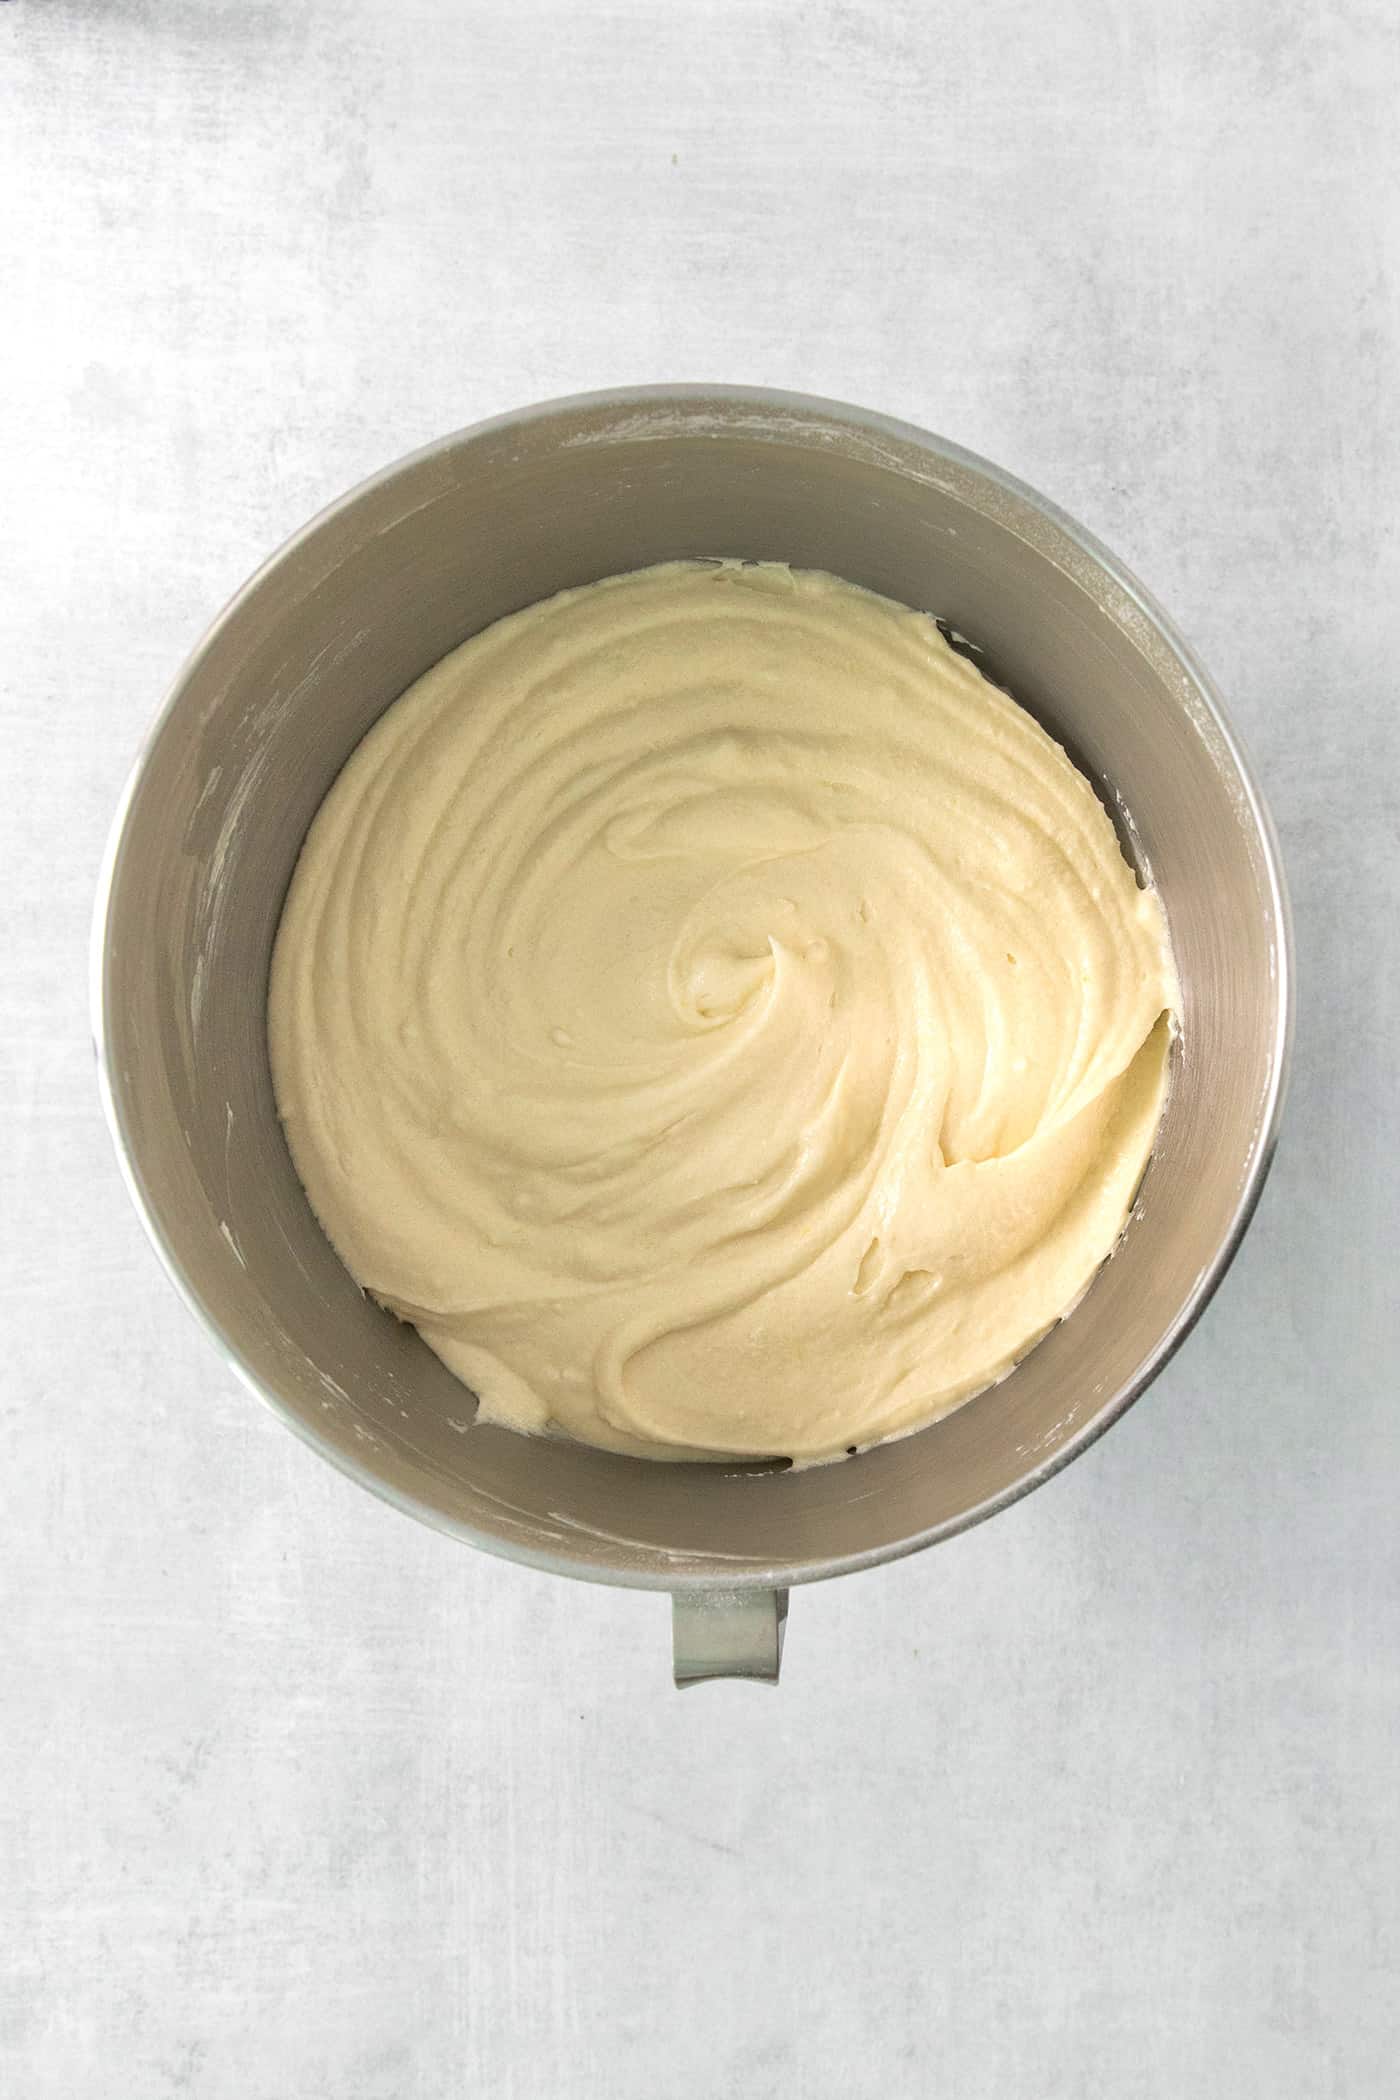 Cake batter is shown in the bowl of a stand mixer.